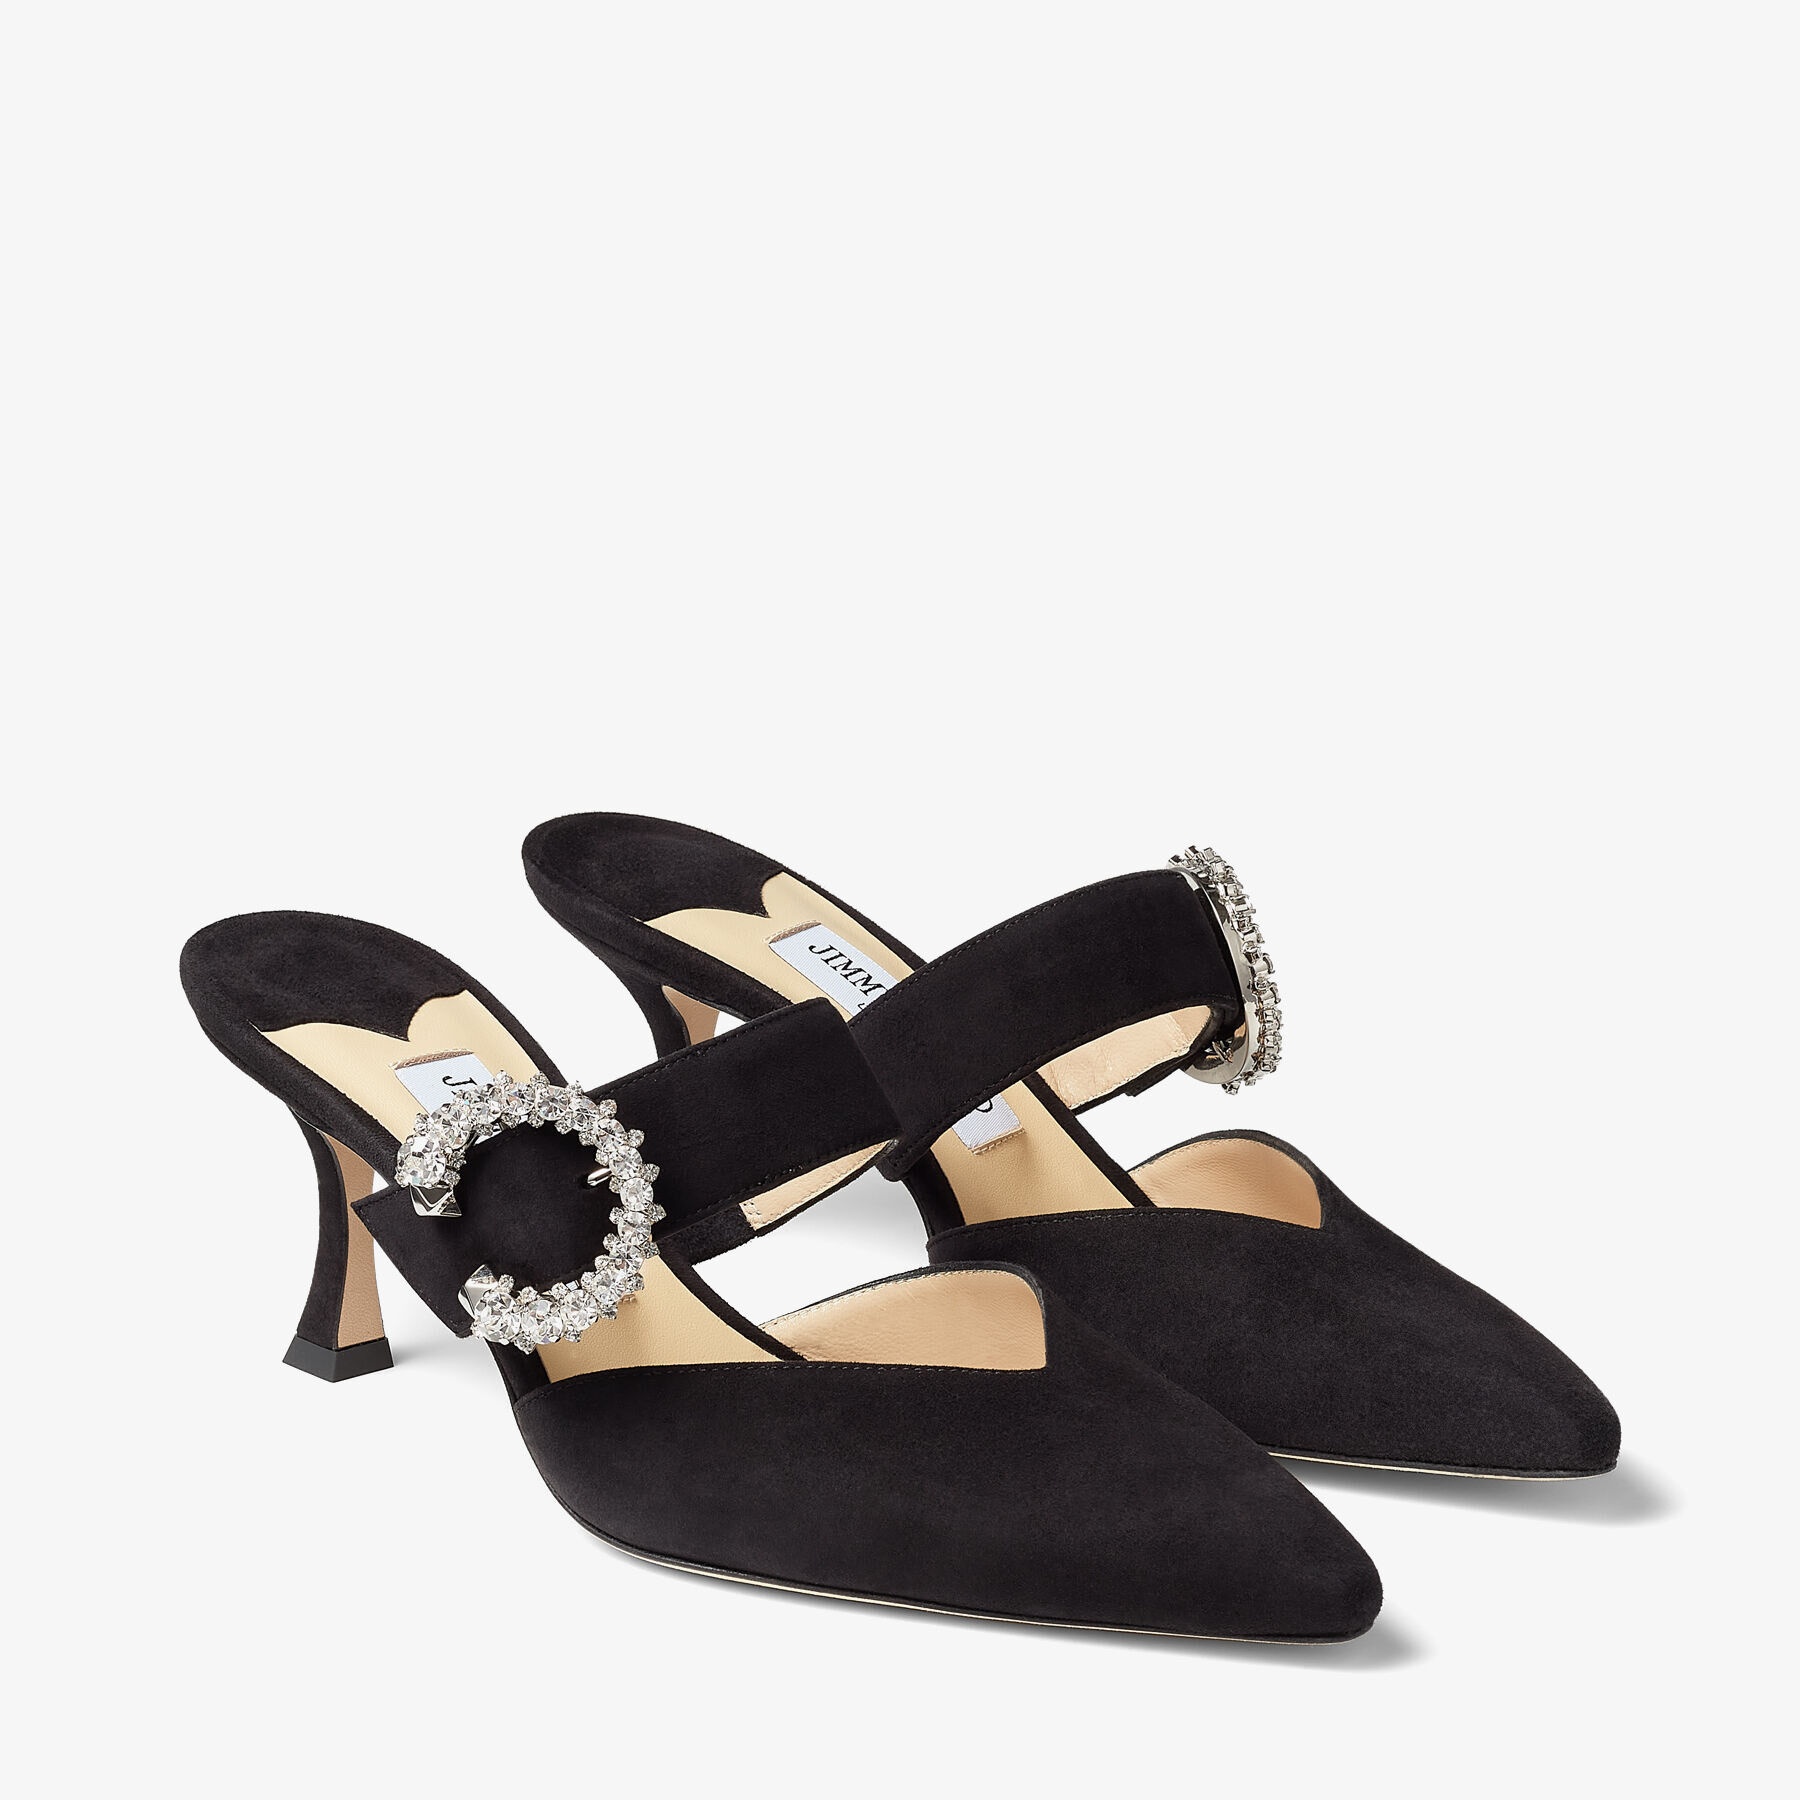 Marta 70
Black Suede Mules with Crystal Buckle - 3